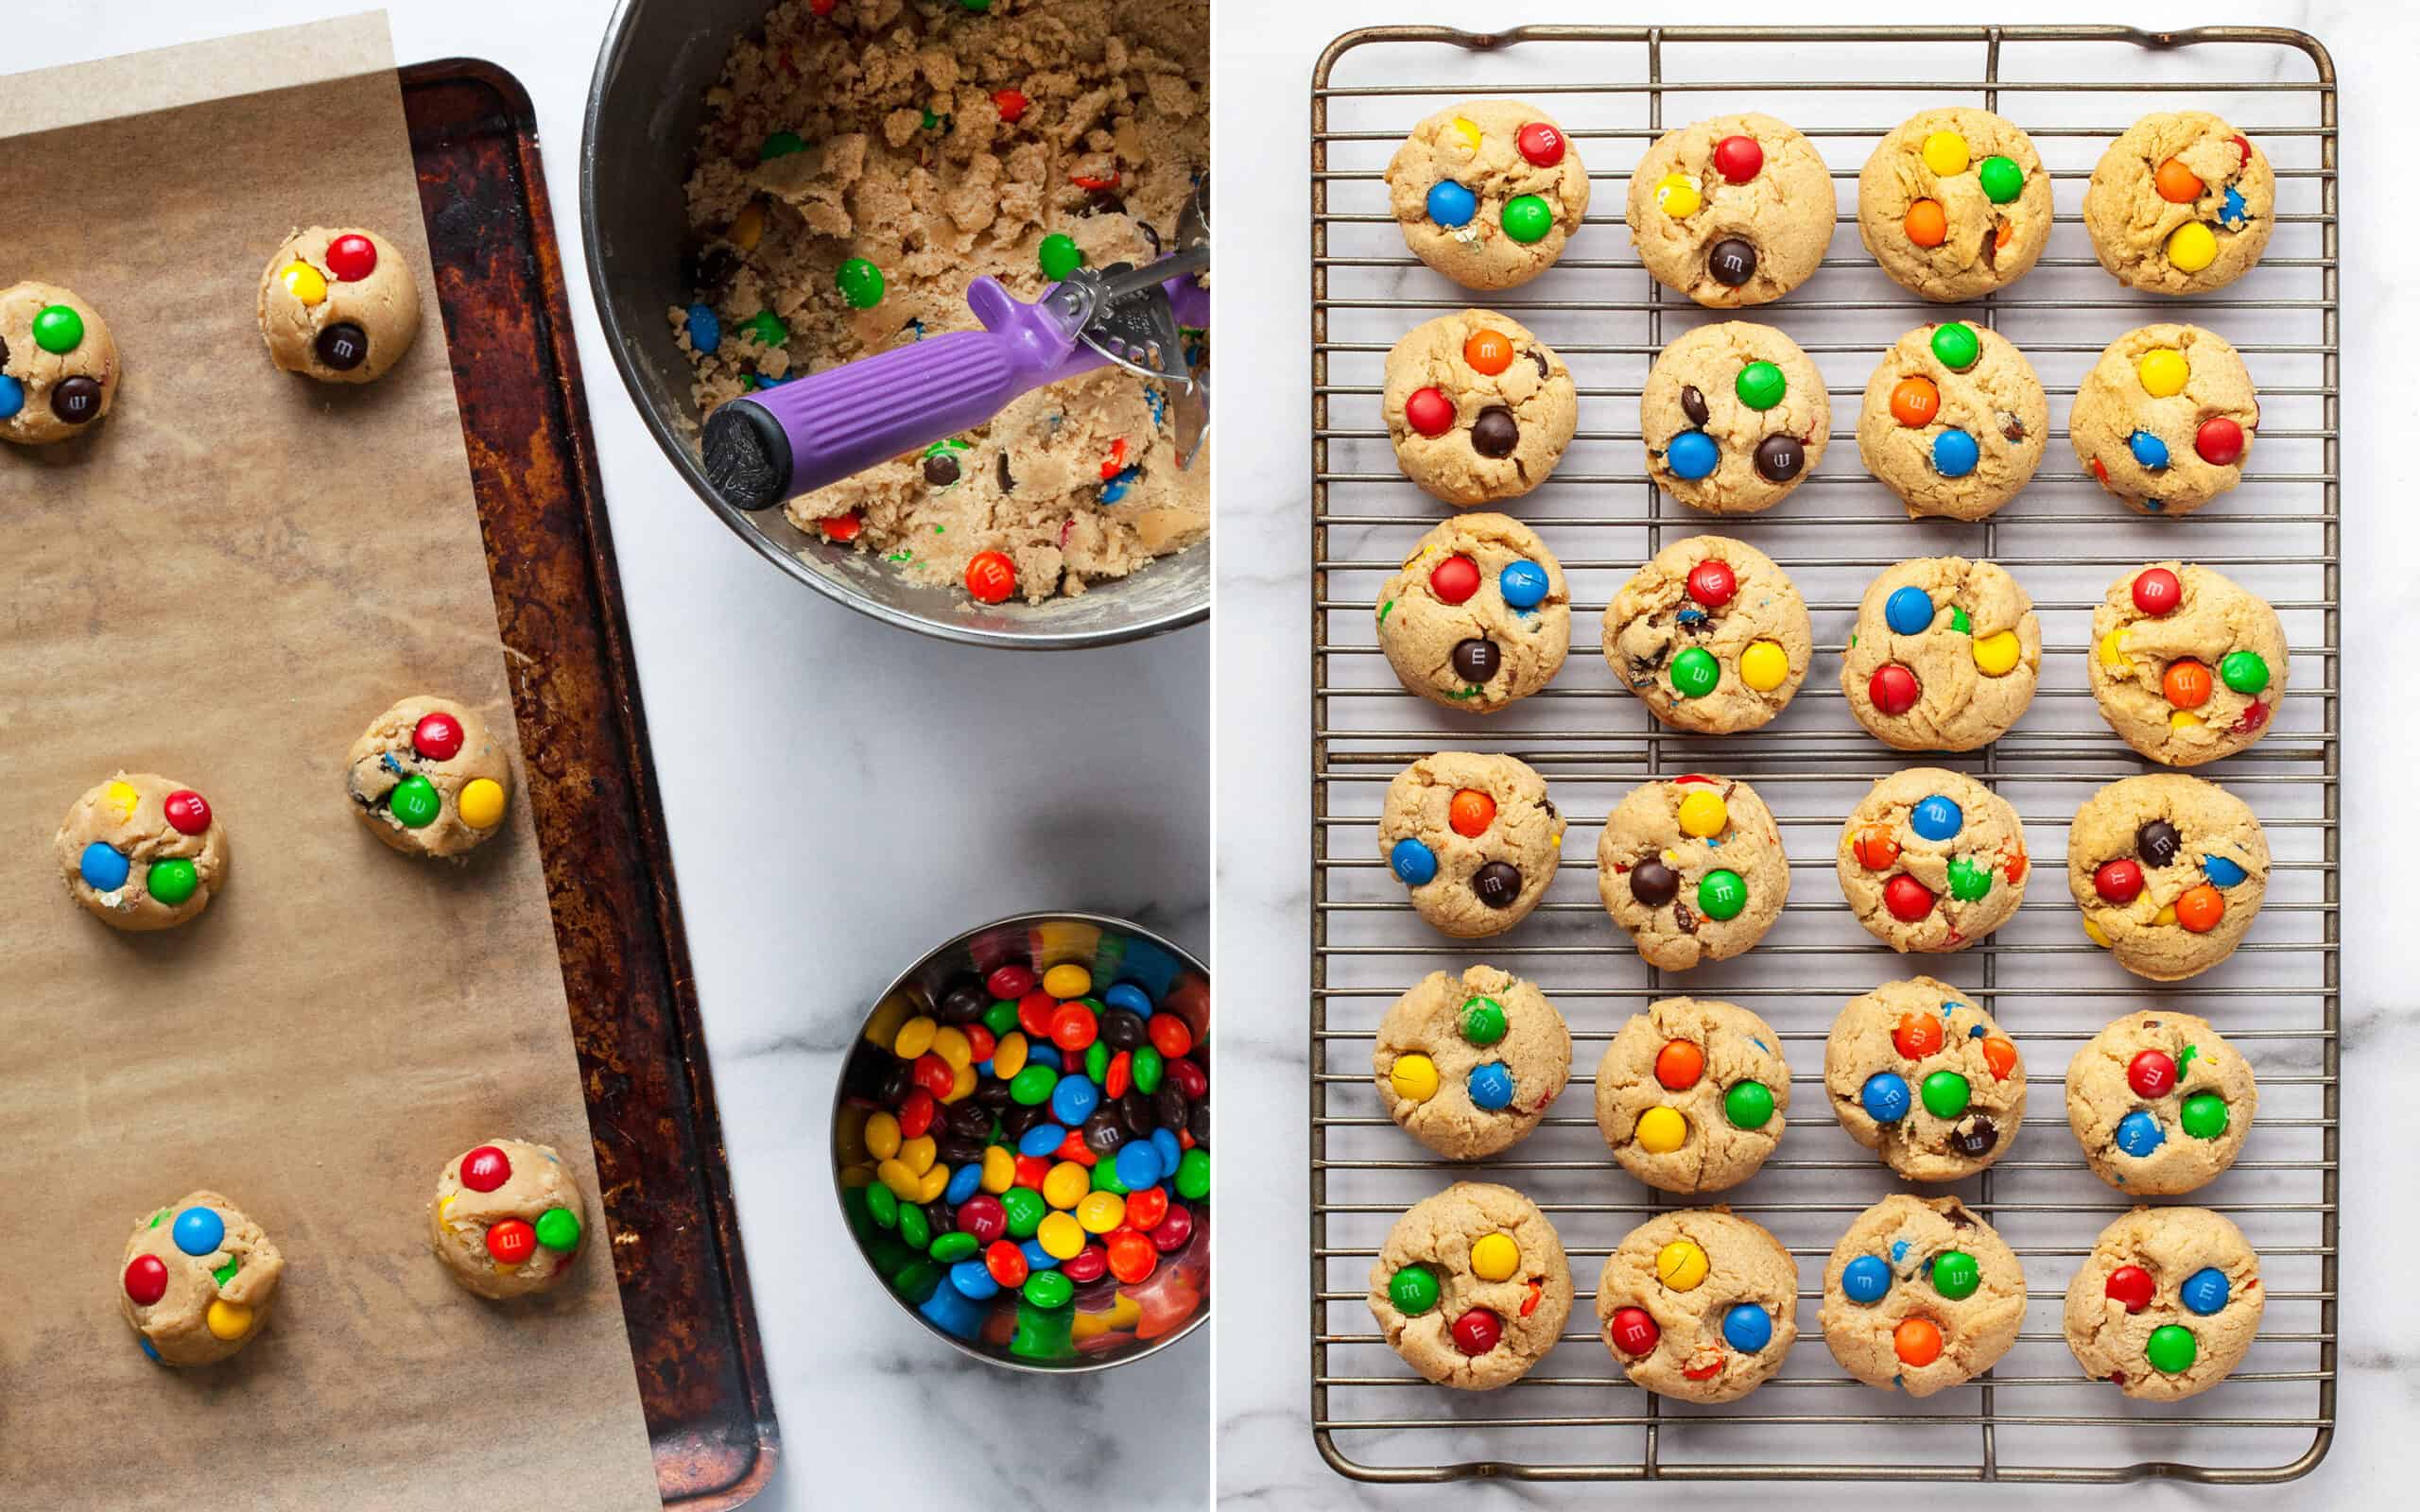 Use a cookie scoop to portion out the dough on a sheet pan and press M&Ms into the dough balls. After the cookies are baked, cool them on a wire rack.